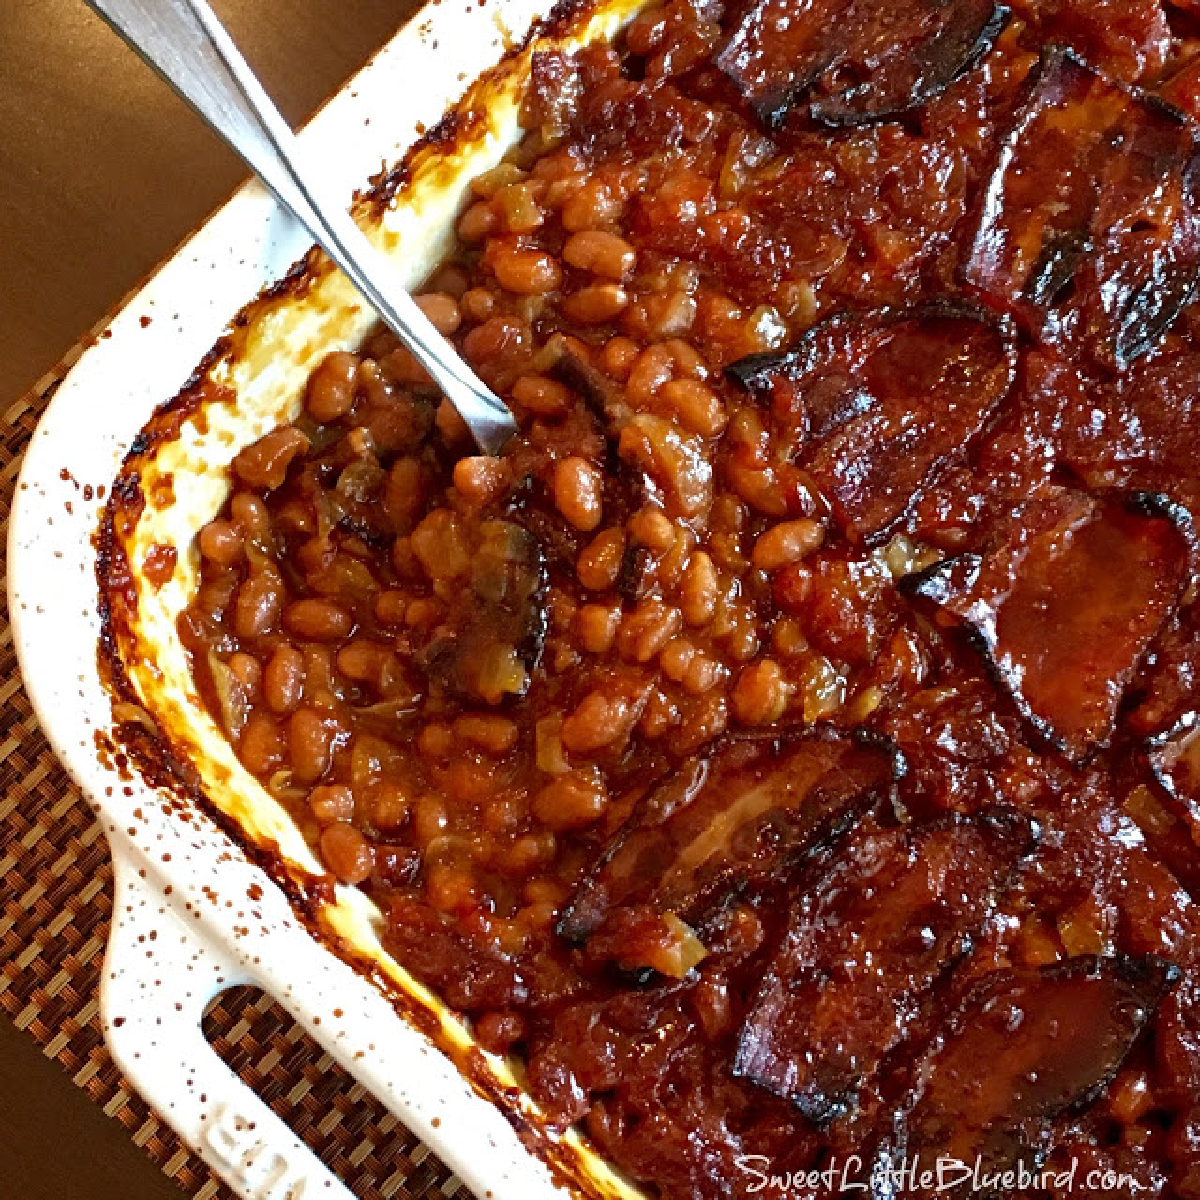 This is a photo of the Best Baked Beans (0ven or Slow Cooker), after baking in a white casserole dish with a spoon, ready to serve. 